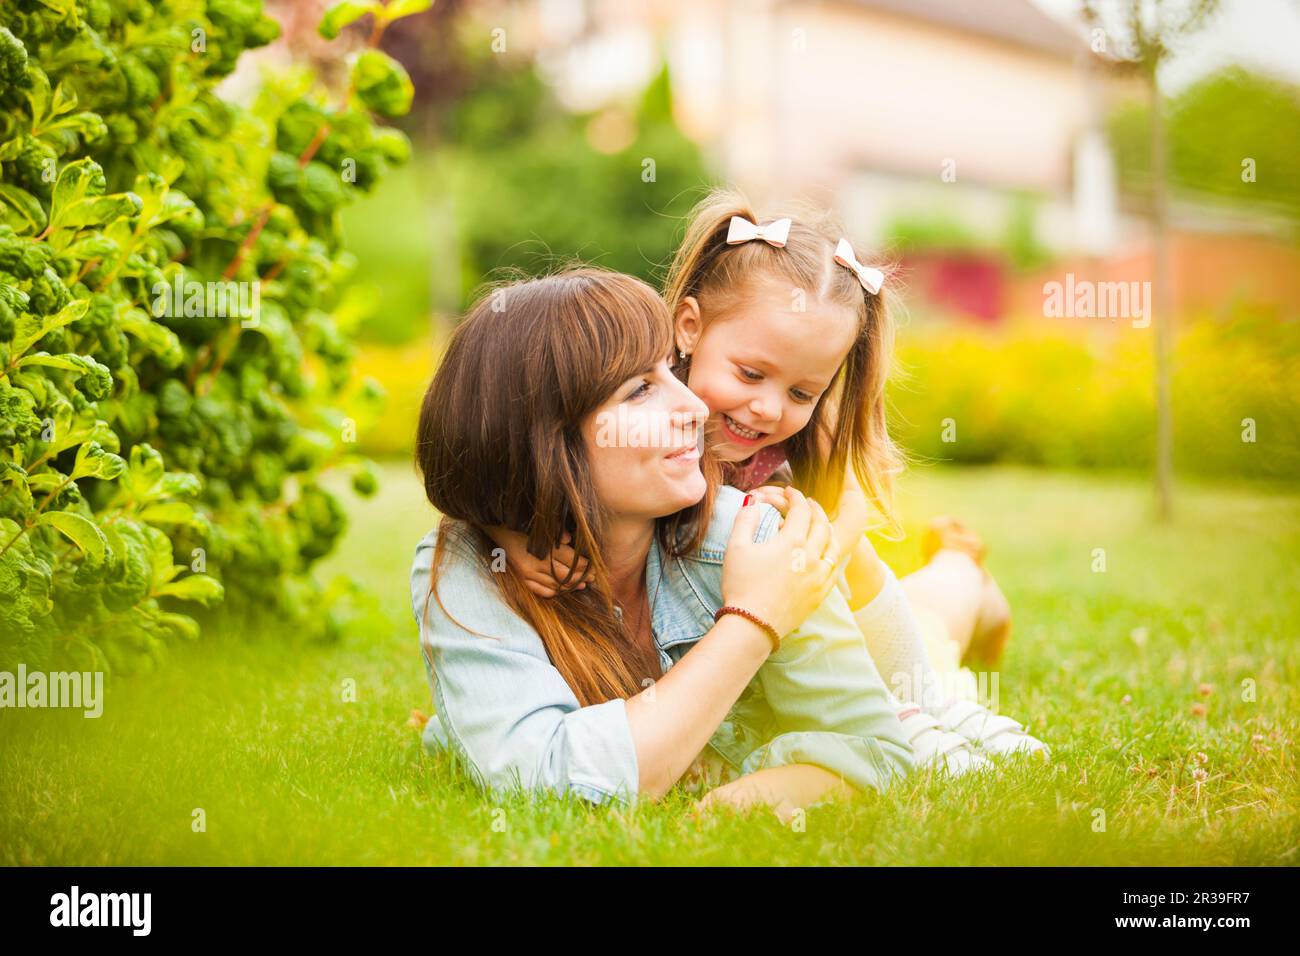 Young mother and daughter having fun together outdoors Stock Photo